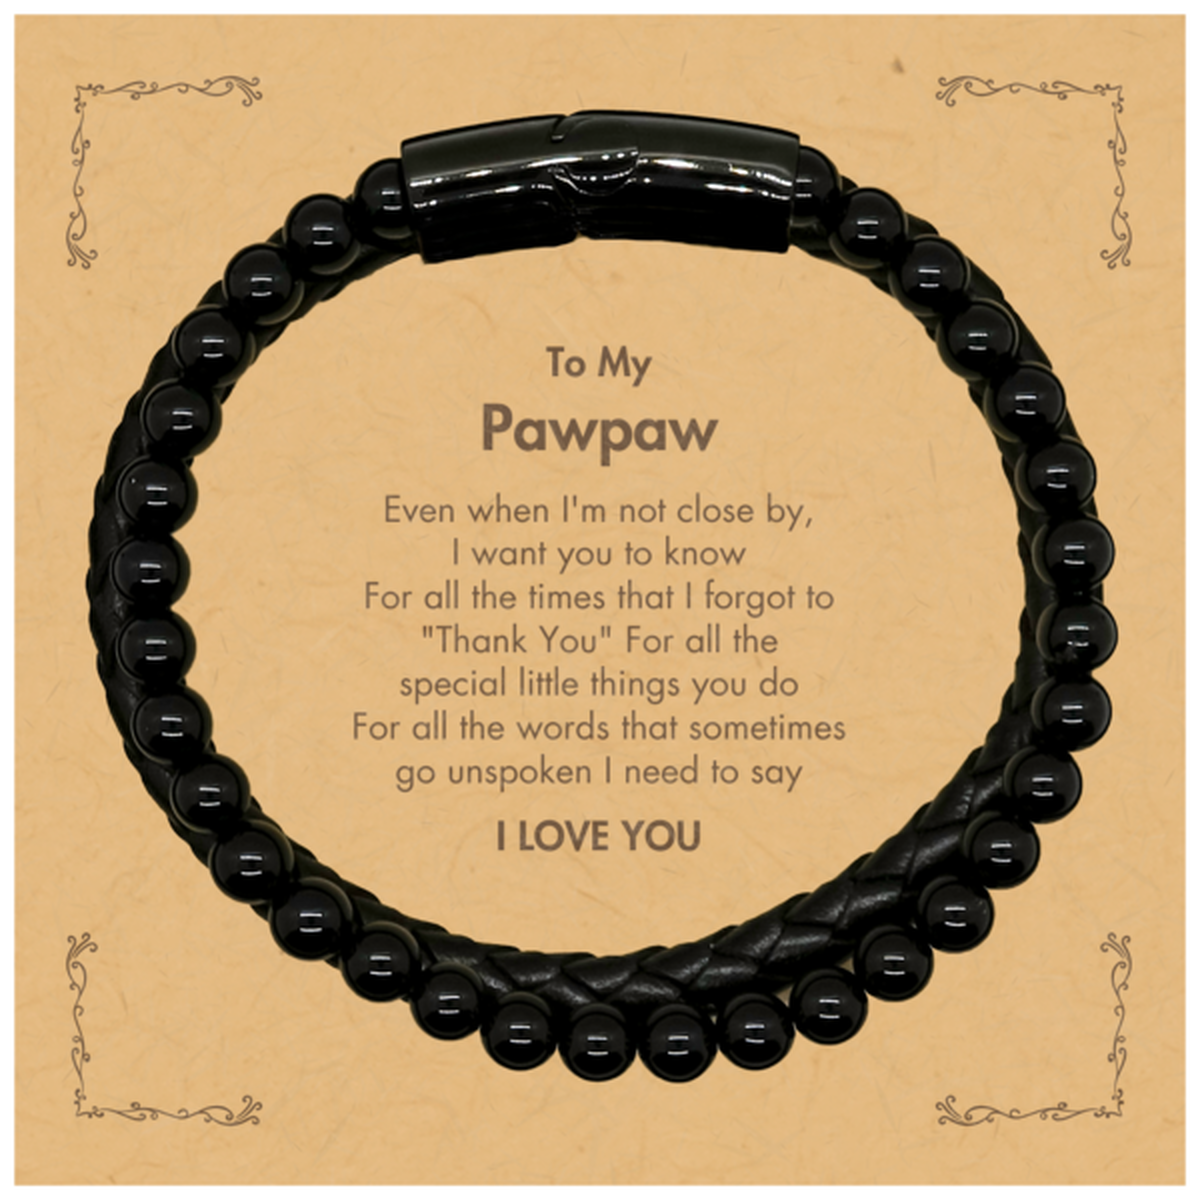 Thank You Gifts for Pawpaw, Keepsake Stone Leather Bracelets Gifts for Pawpaw Birthday Mother's day Father's Day Pawpaw For all the words That sometimes go unspoken I need to say I LOVE YOU